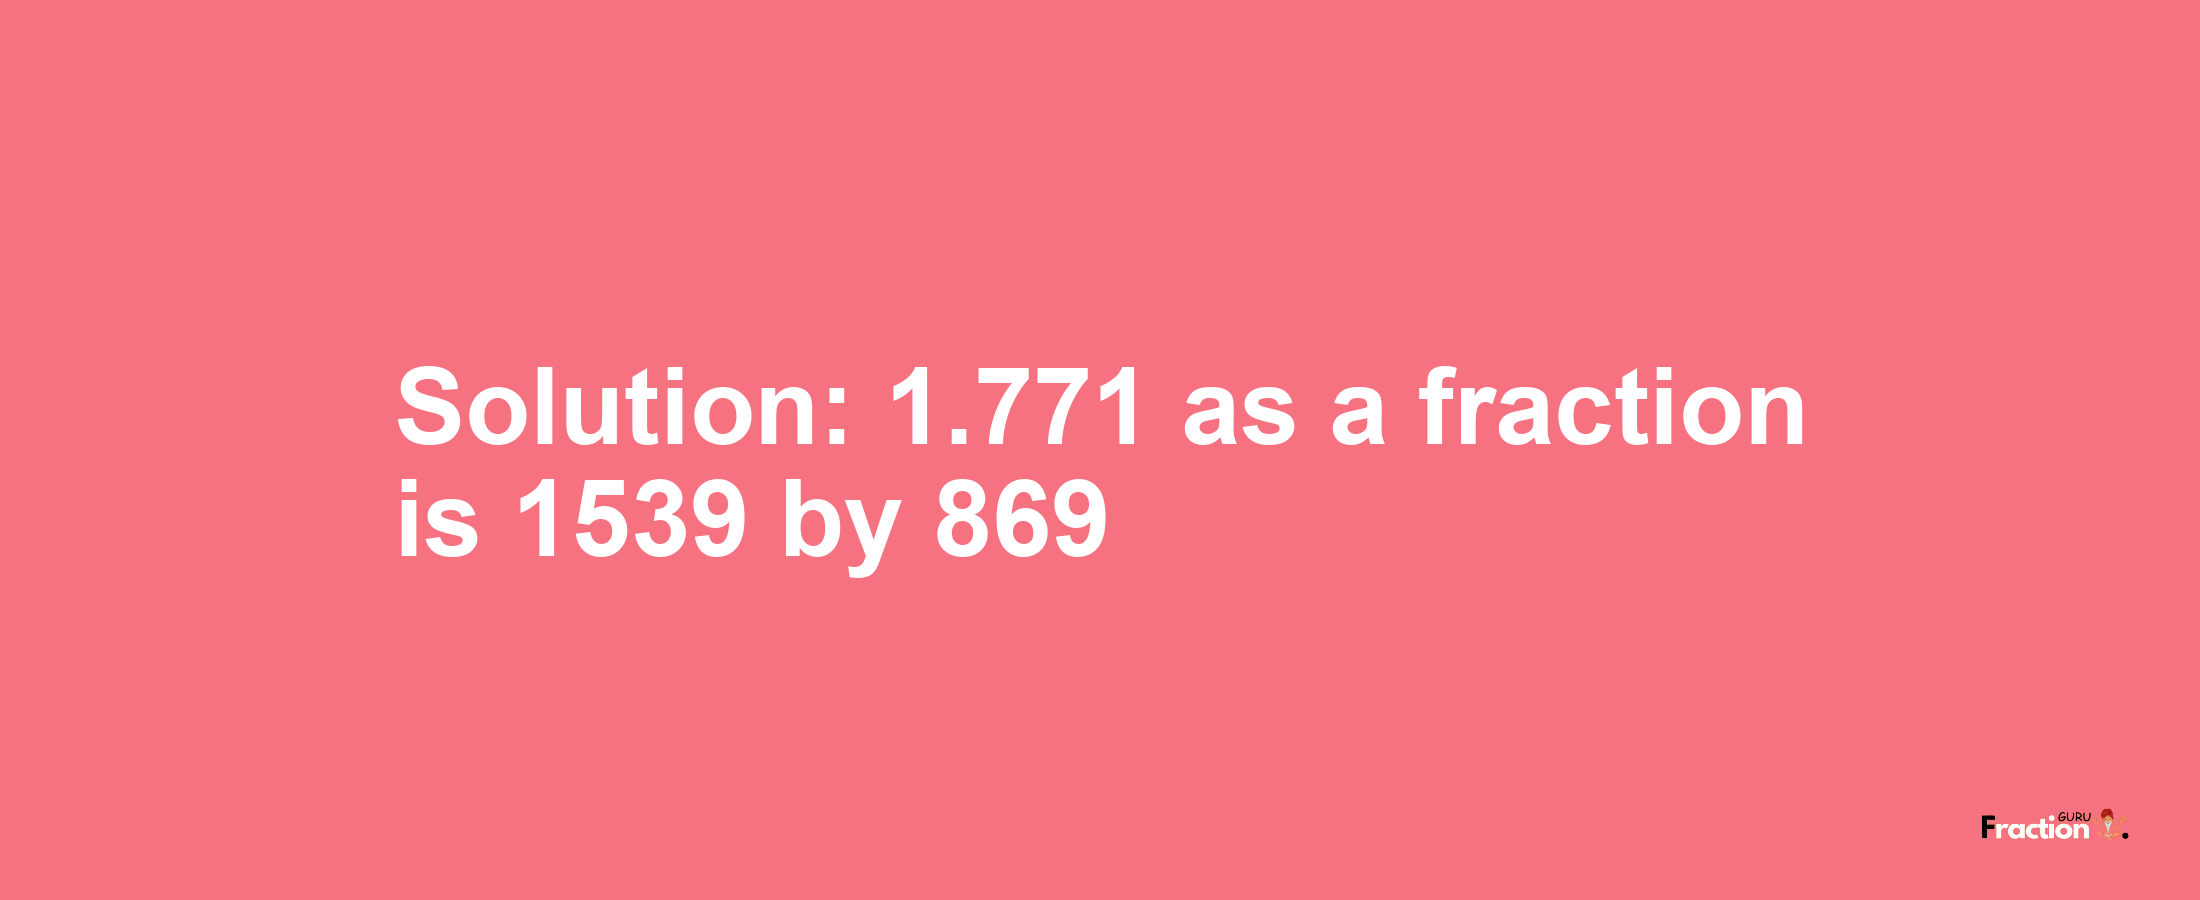 Solution:1.771 as a fraction is 1539/869